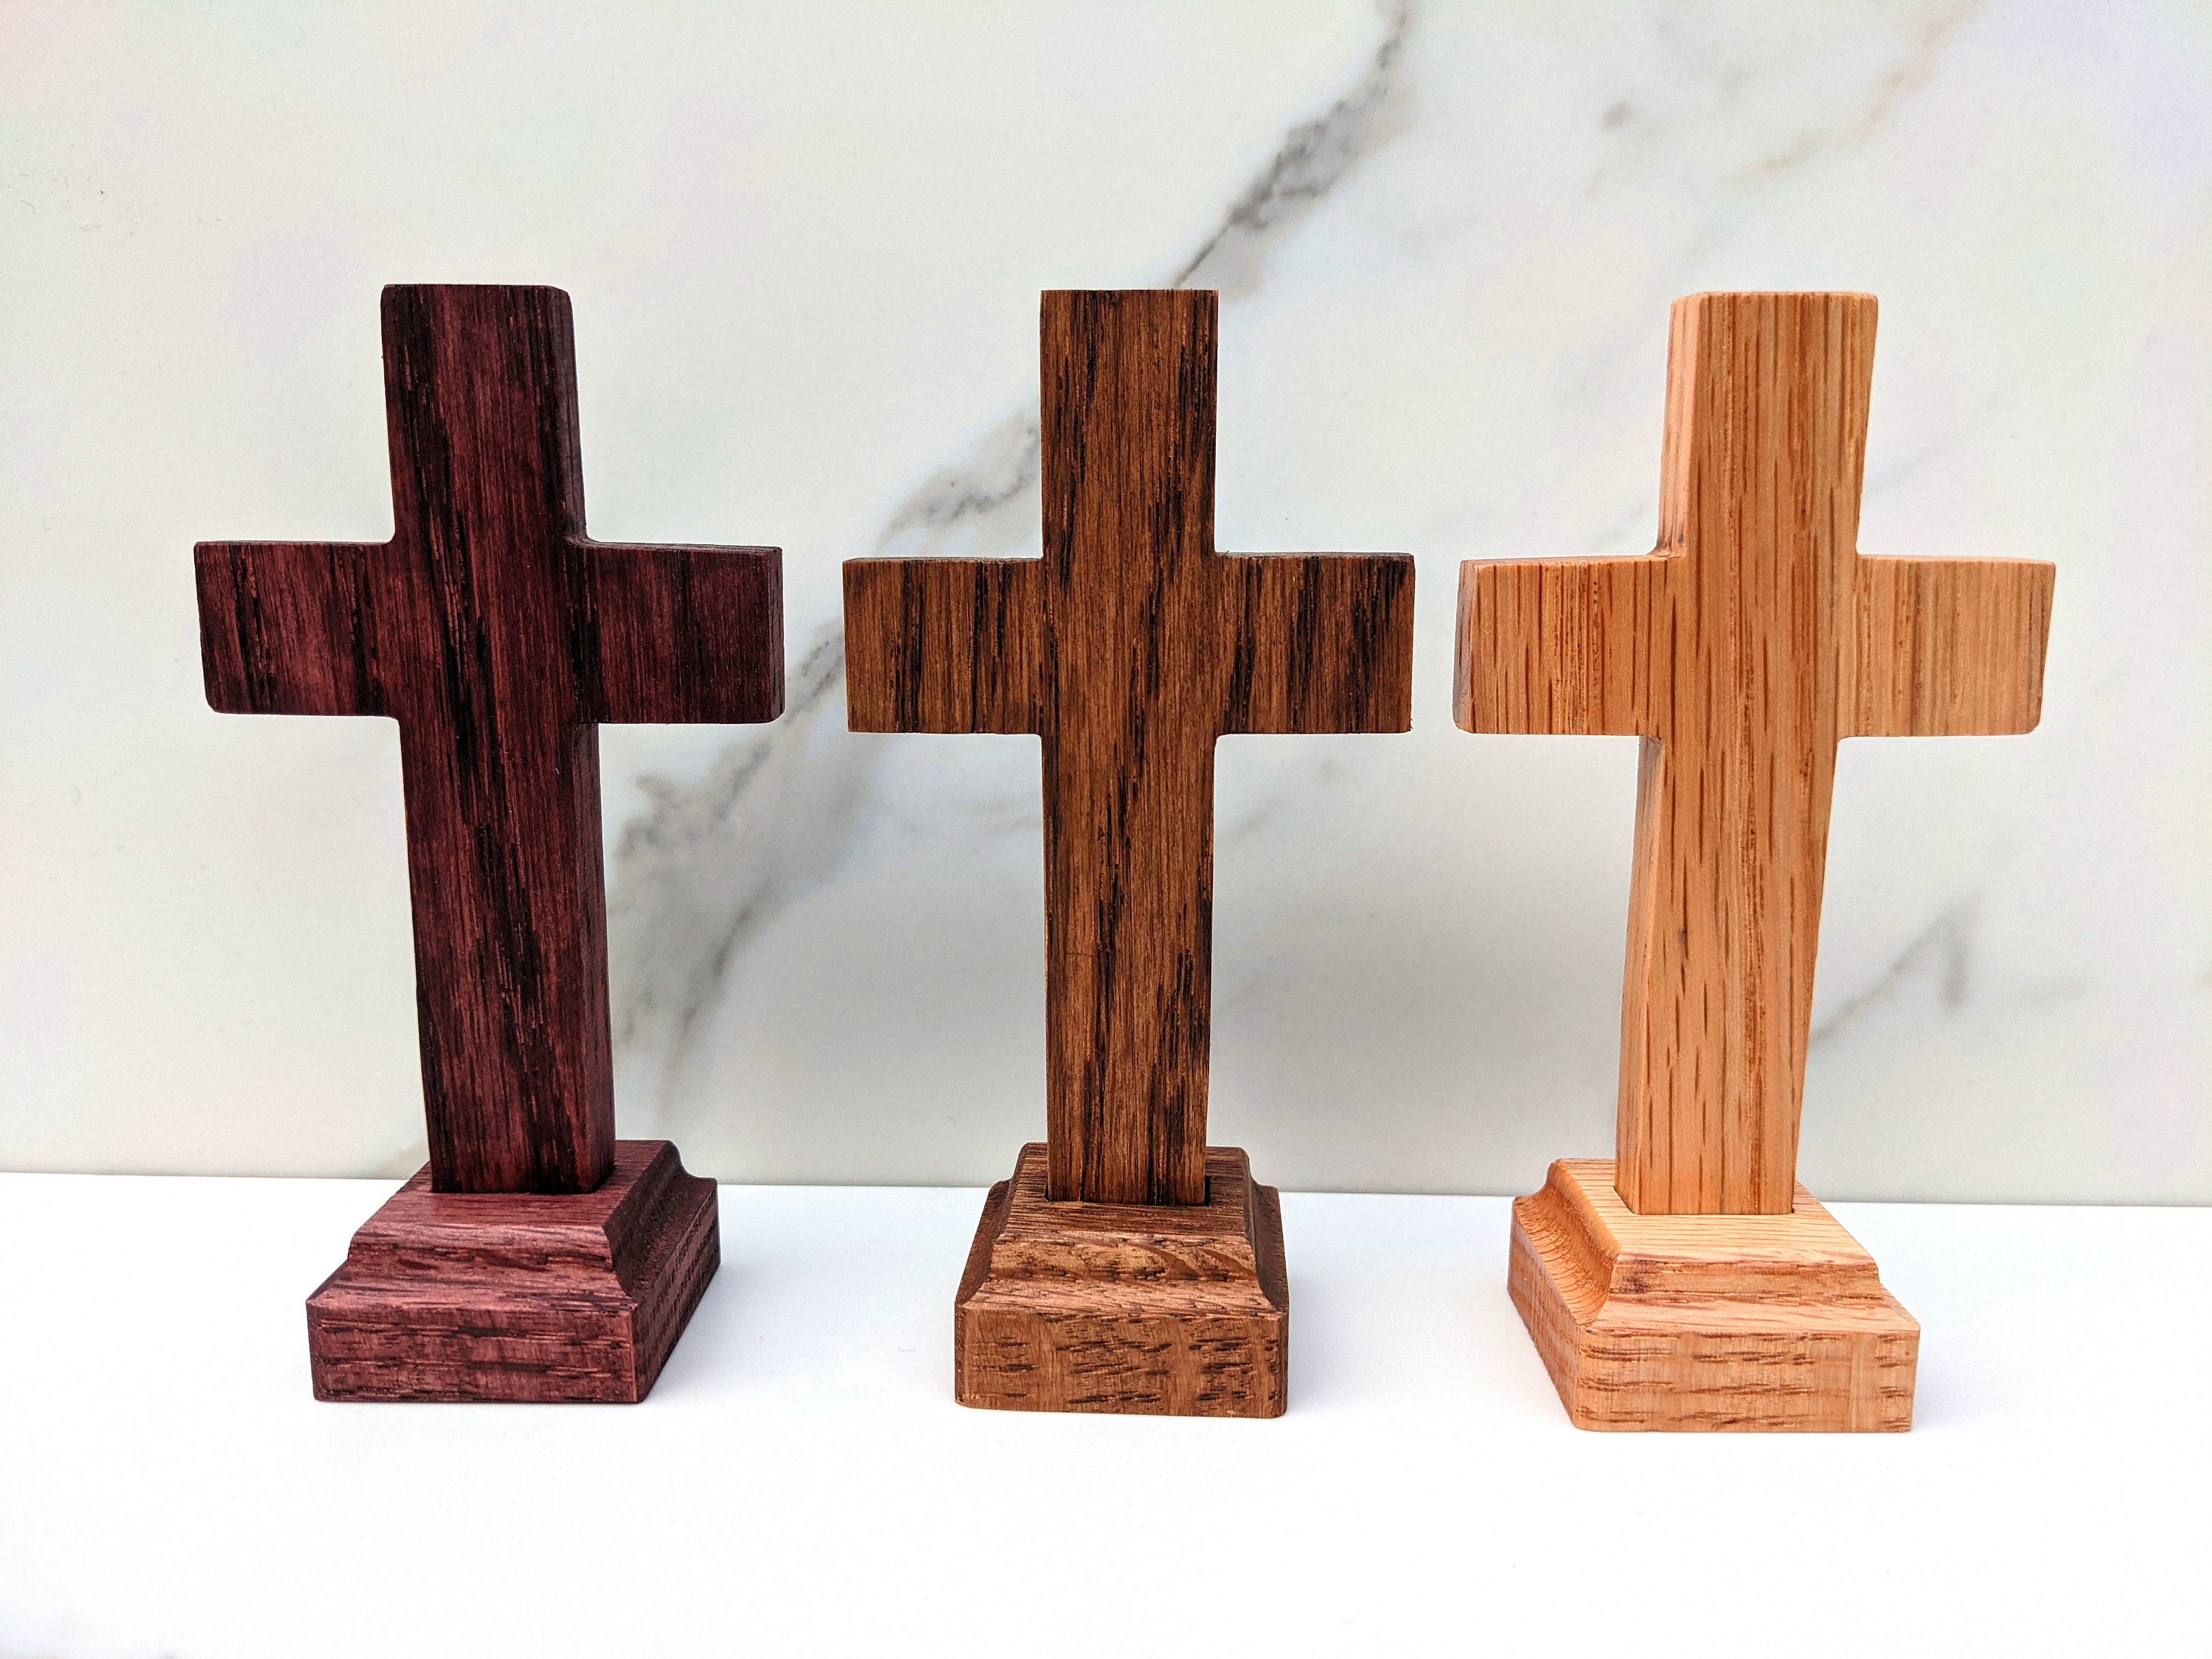 10/30pcs Mini Wooden Crosses Pendants Bulk Mini Wood Cross Charm For Craft  Cross Charms With Chains Christian Baptism Cross Party Favor For Keychain N